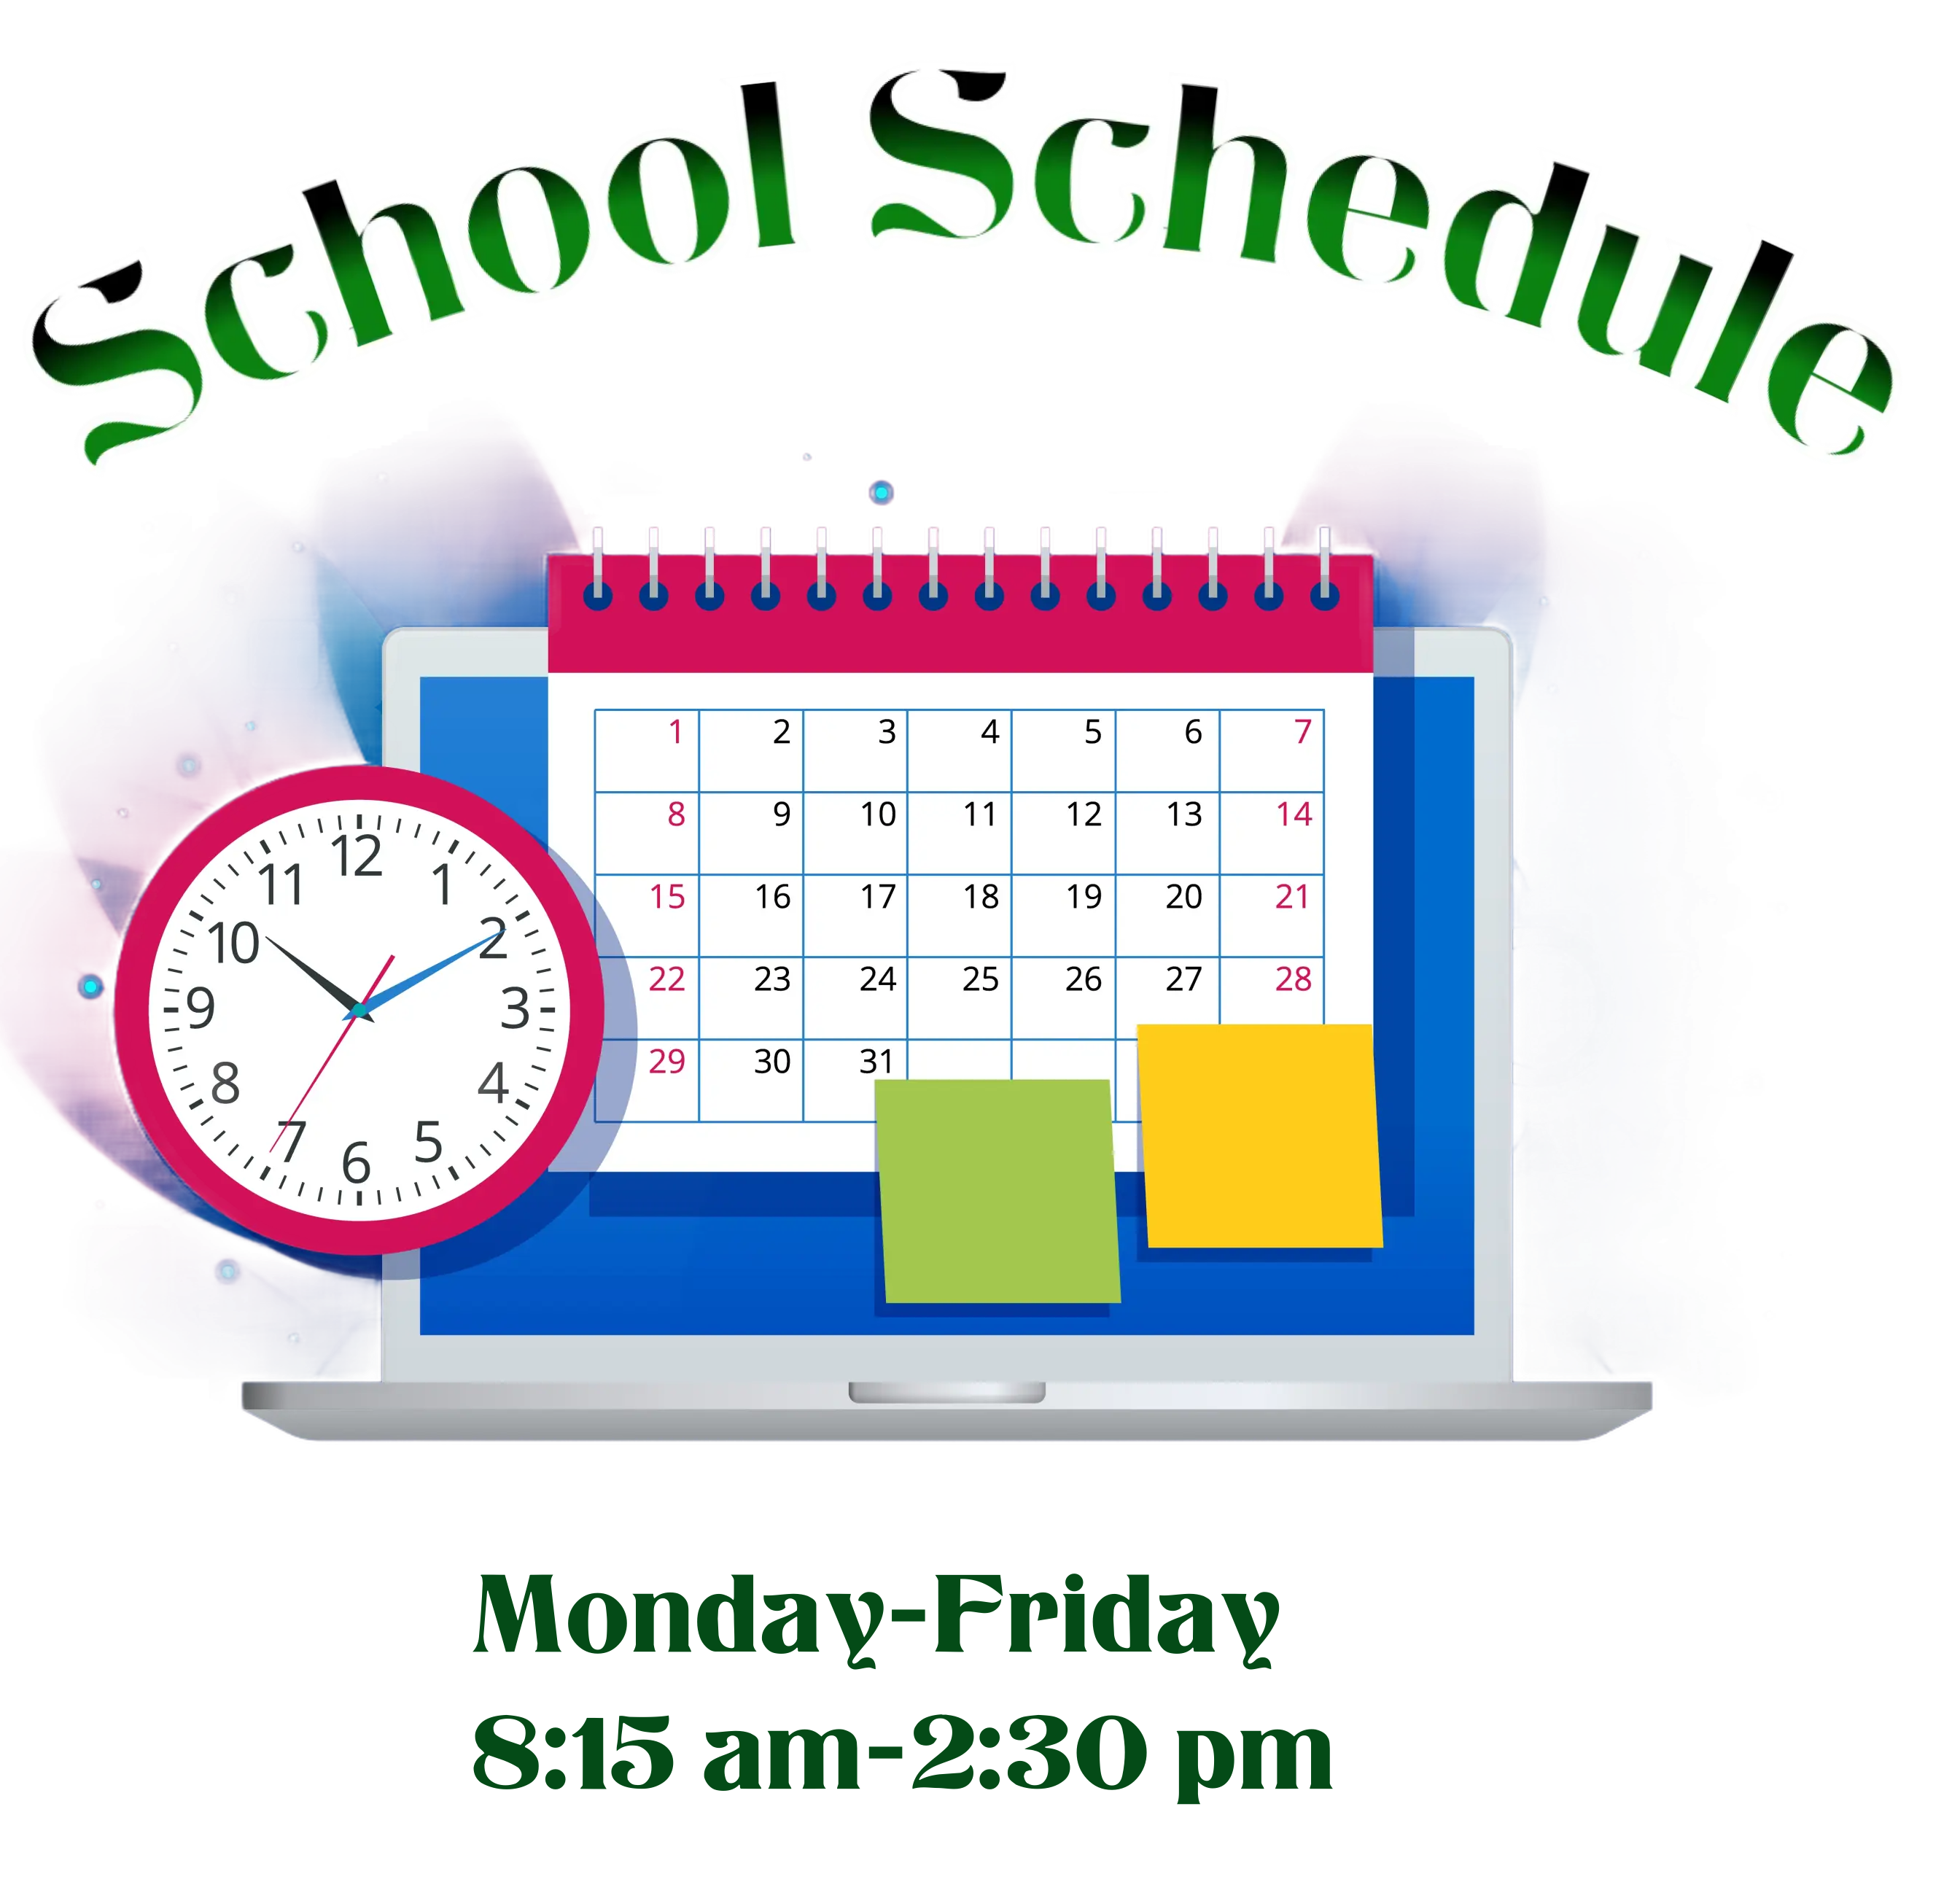 school schedule. picture of laptop, calendar, and clock. Monday-Friday. 8:15 am-2:30 pm